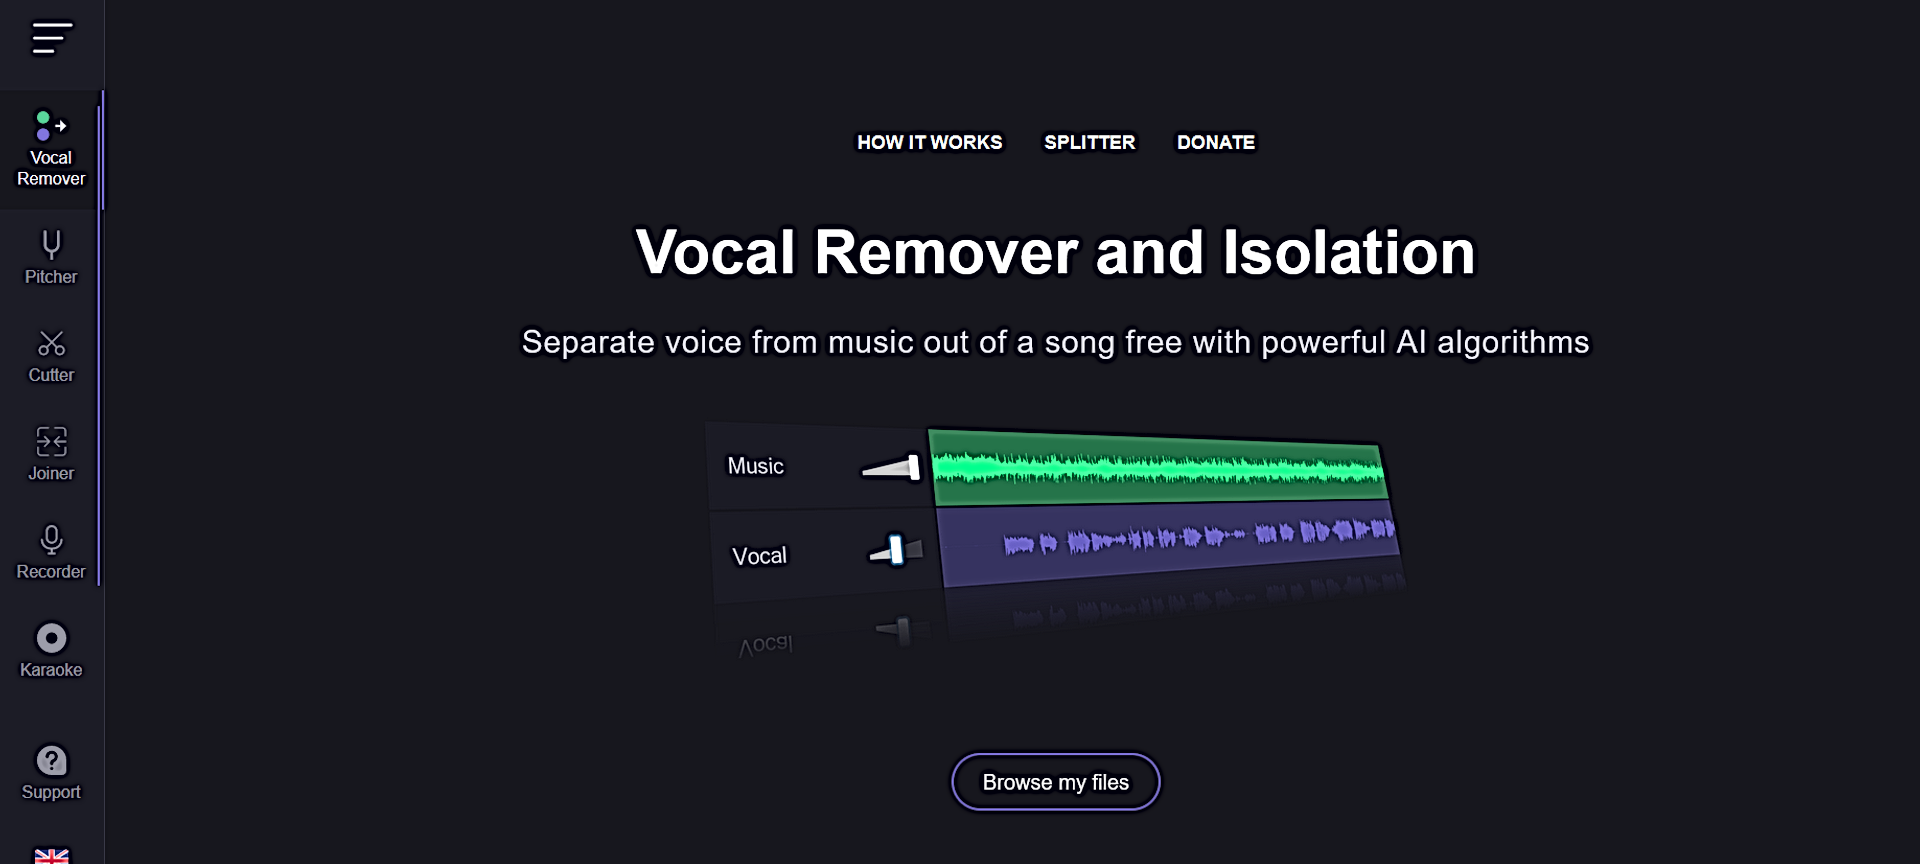 Vocal Remover featured